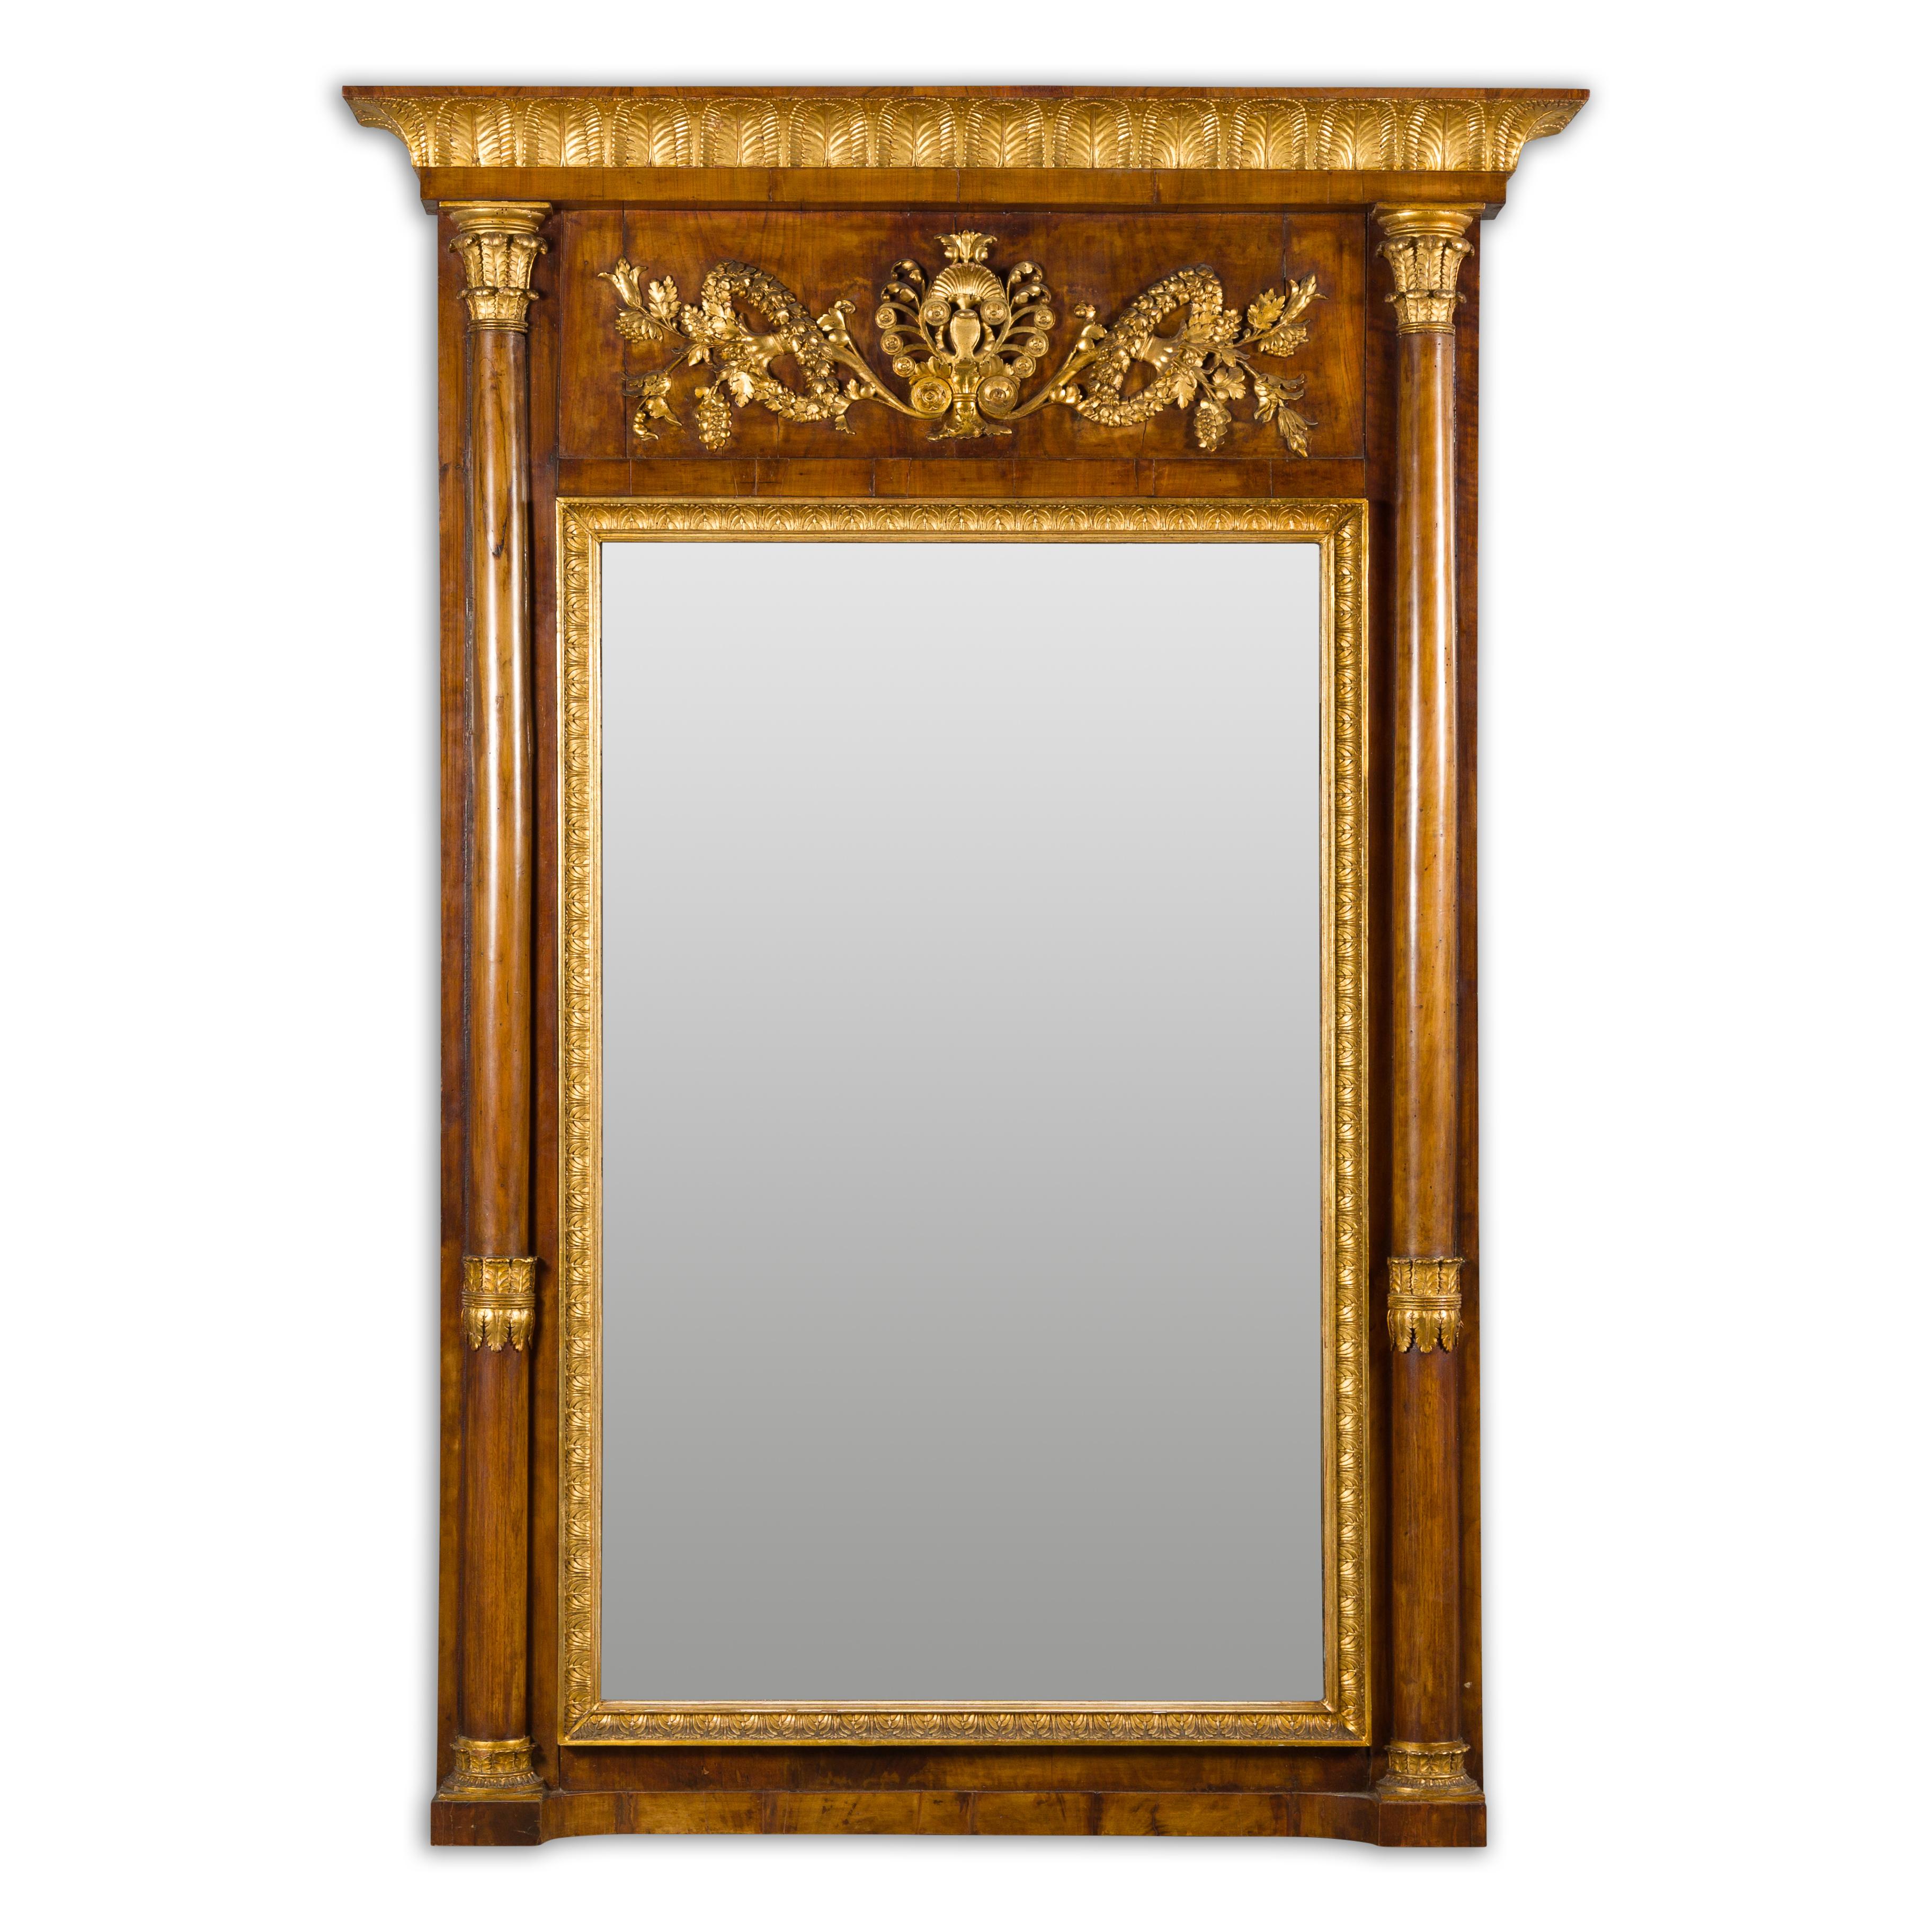 An Austrian Biedermeier period walnut tall pier mirror from the 19th century, with carved giltwood foliage, slender columns and frieze of palmette motifs. This Austrian Biedermeier period walnut tall pier mirror from the 19th century is an exquisite